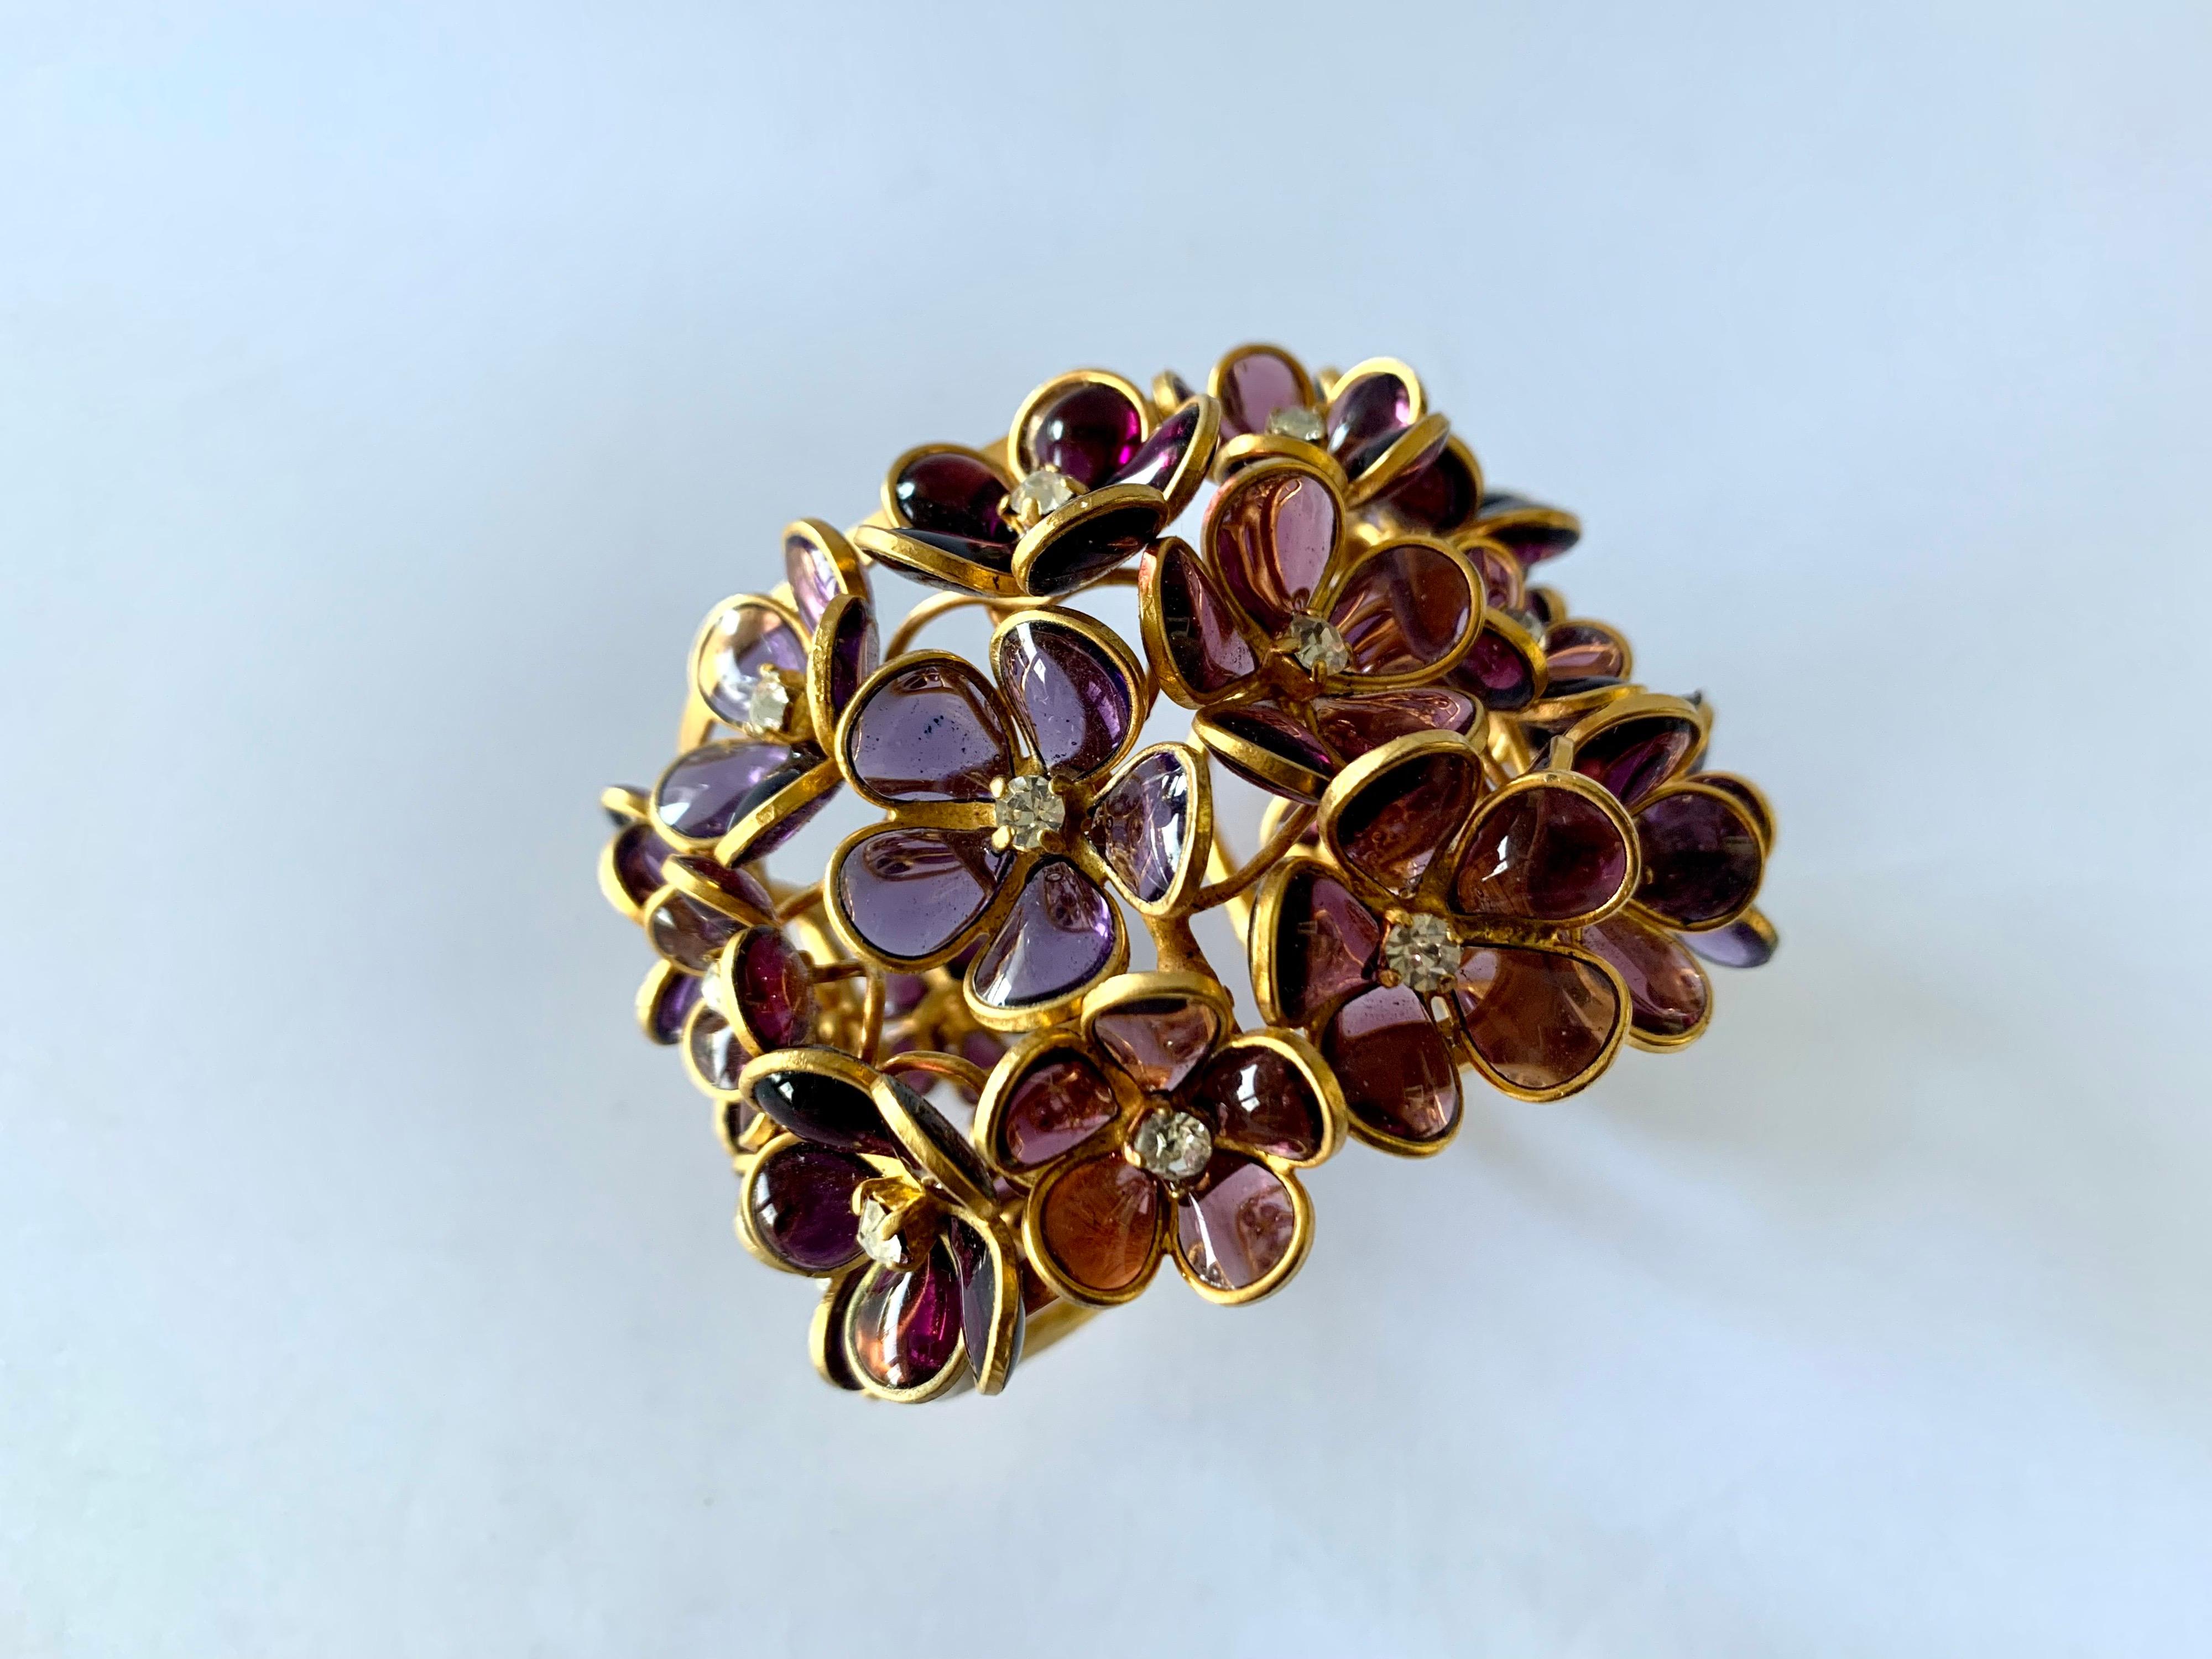 Beautiful artisanal French gold-tone (meral dore) cuff bracelet formed of intricate 